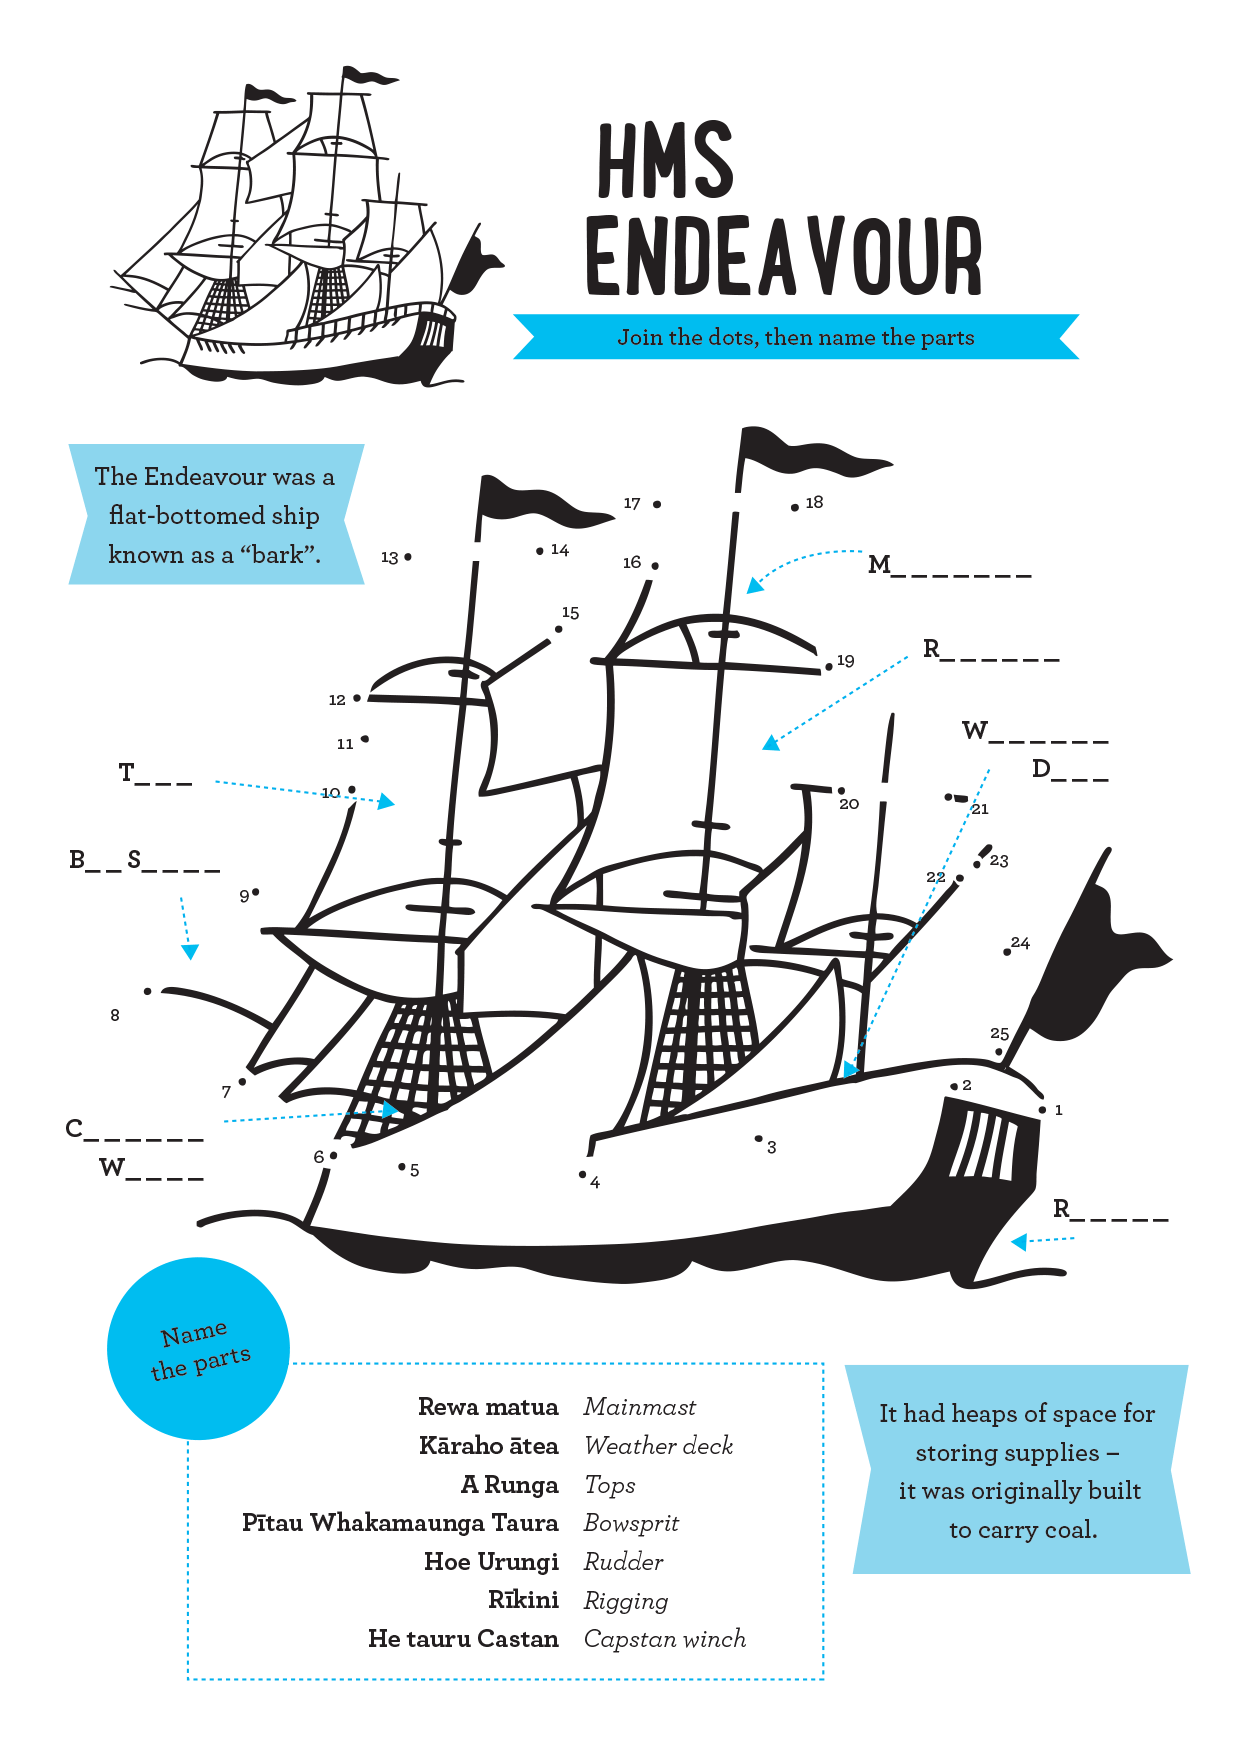 Partially illustrated HMS Endeavour with numbered dots to guide students to complete the illustration. There are also incomplete names with arrows to different parts of the ship. Part names are listed under 'HMS Endeavour' on this page.